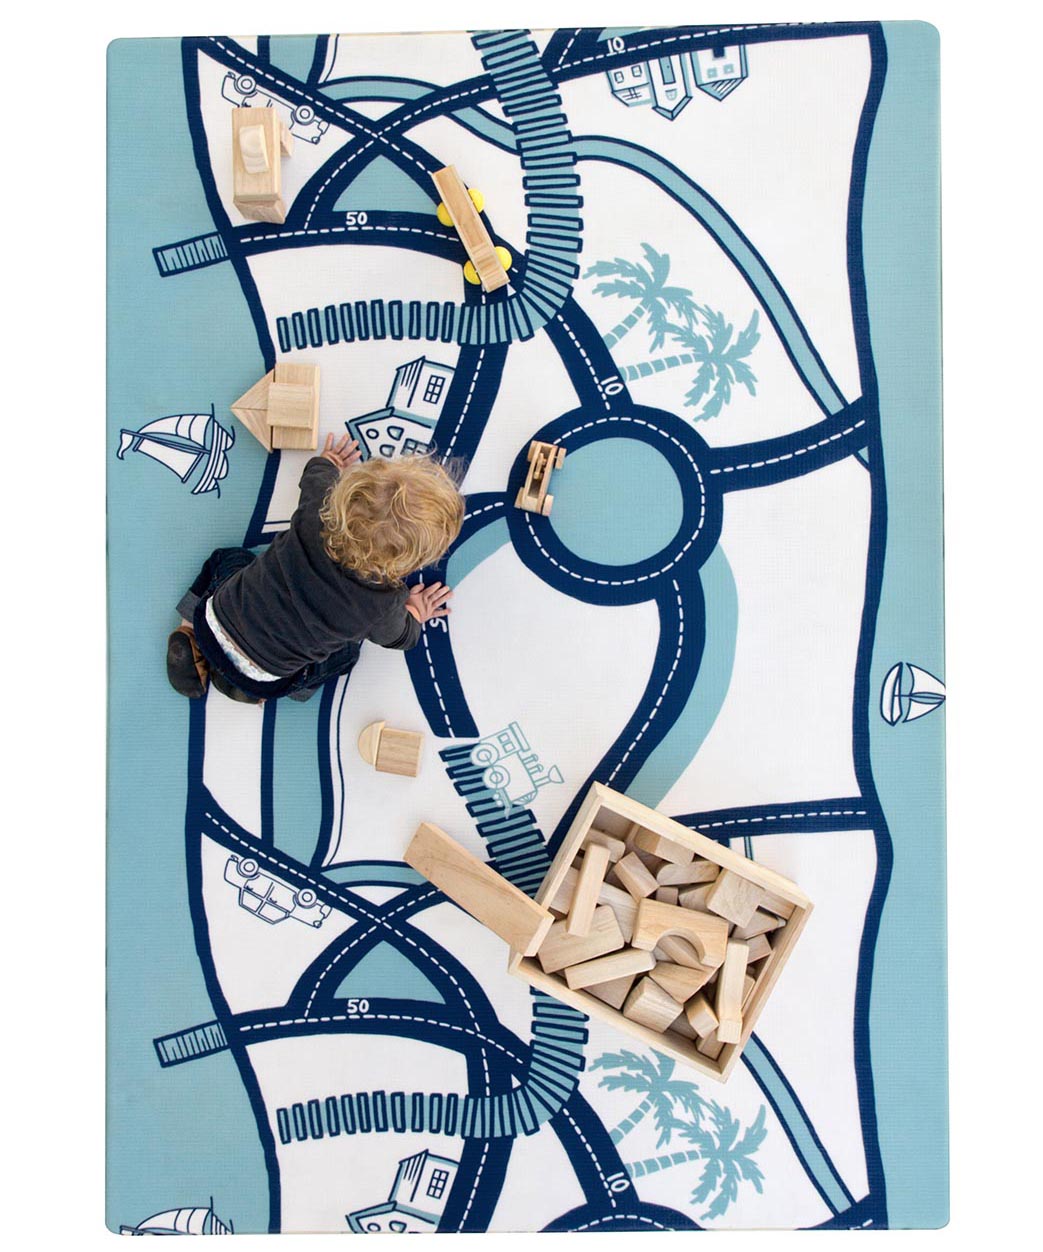 The Bowie Shwally Playmat by Shwally - For Home and Play